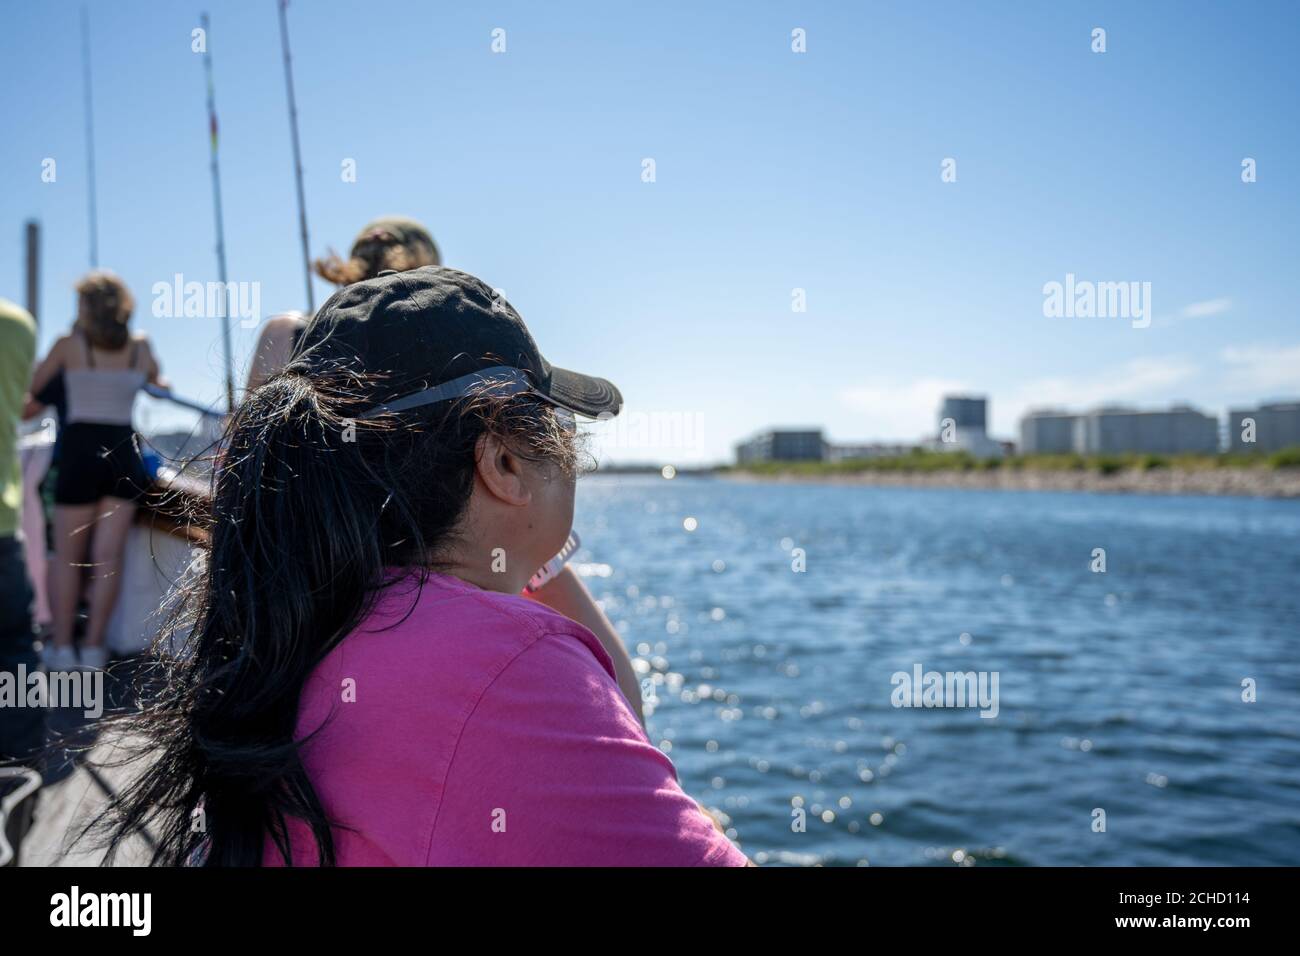 Malmo, Sweden - August 6, 2020: A middle-aged Asian woman on a boat trip a hot summer day. Bright blue sky and ocean in the background Stock Photo